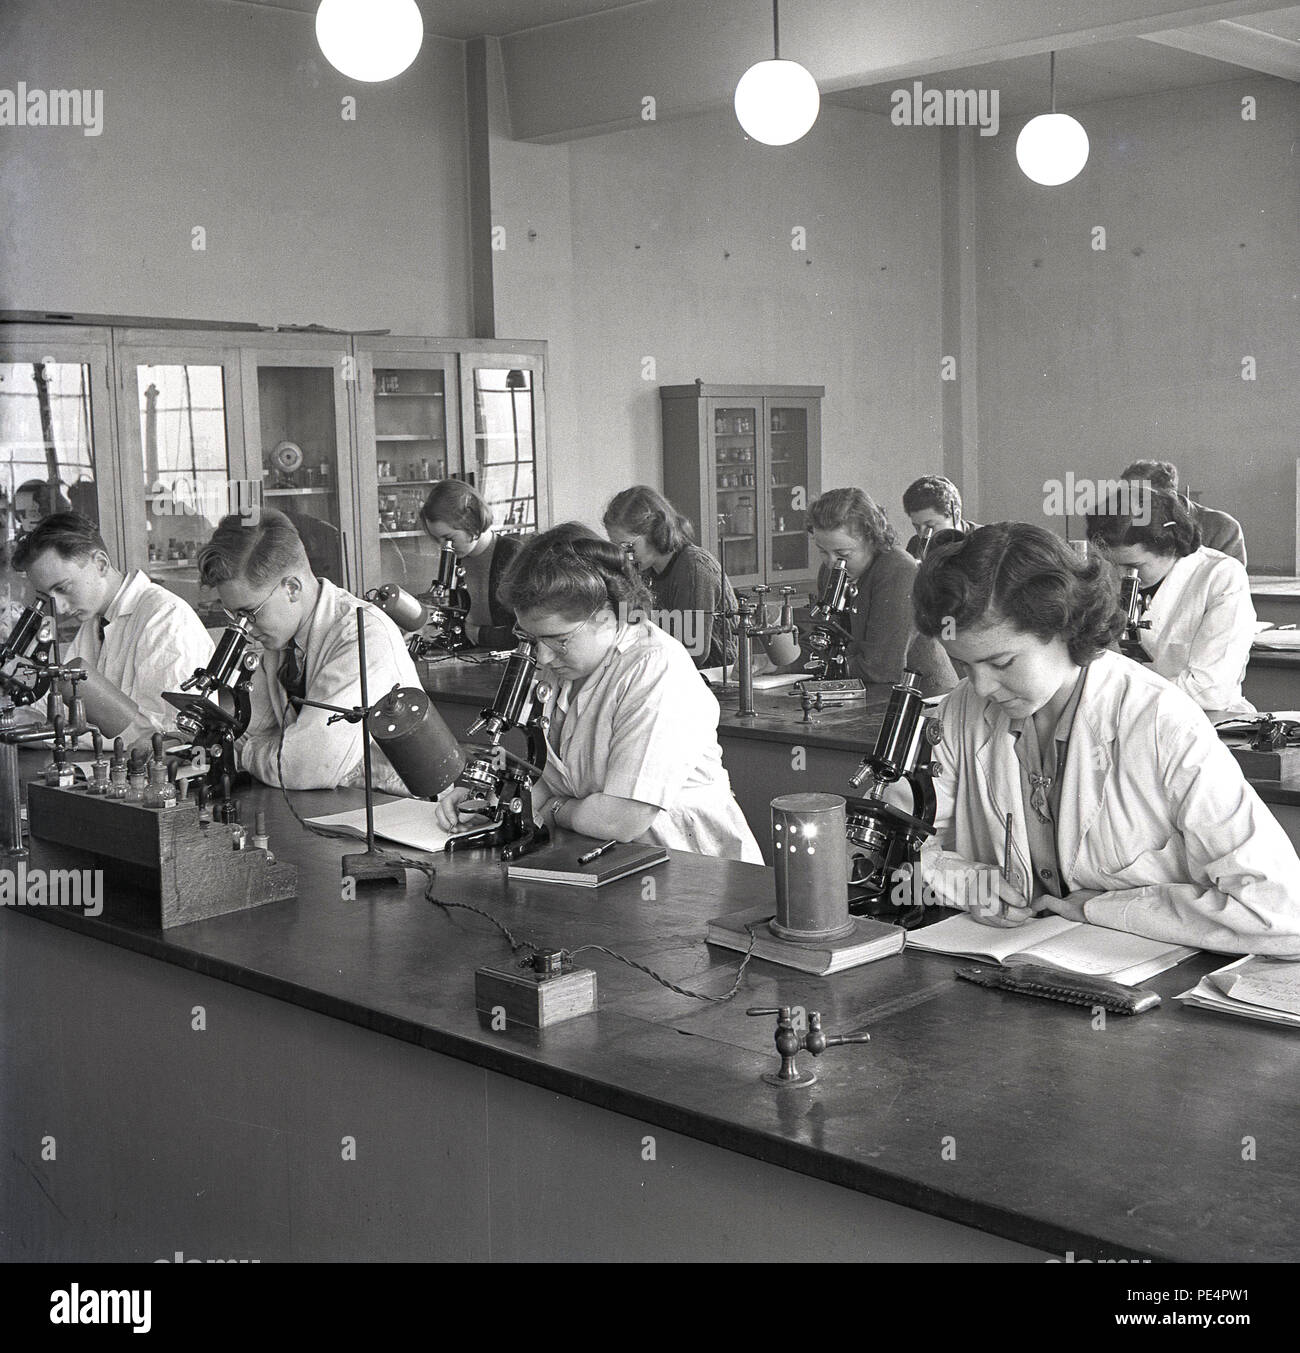 1950s, historical, young adult science undergraduates using microscopes in their studies in a university classroom, England, UK. Stock Photo